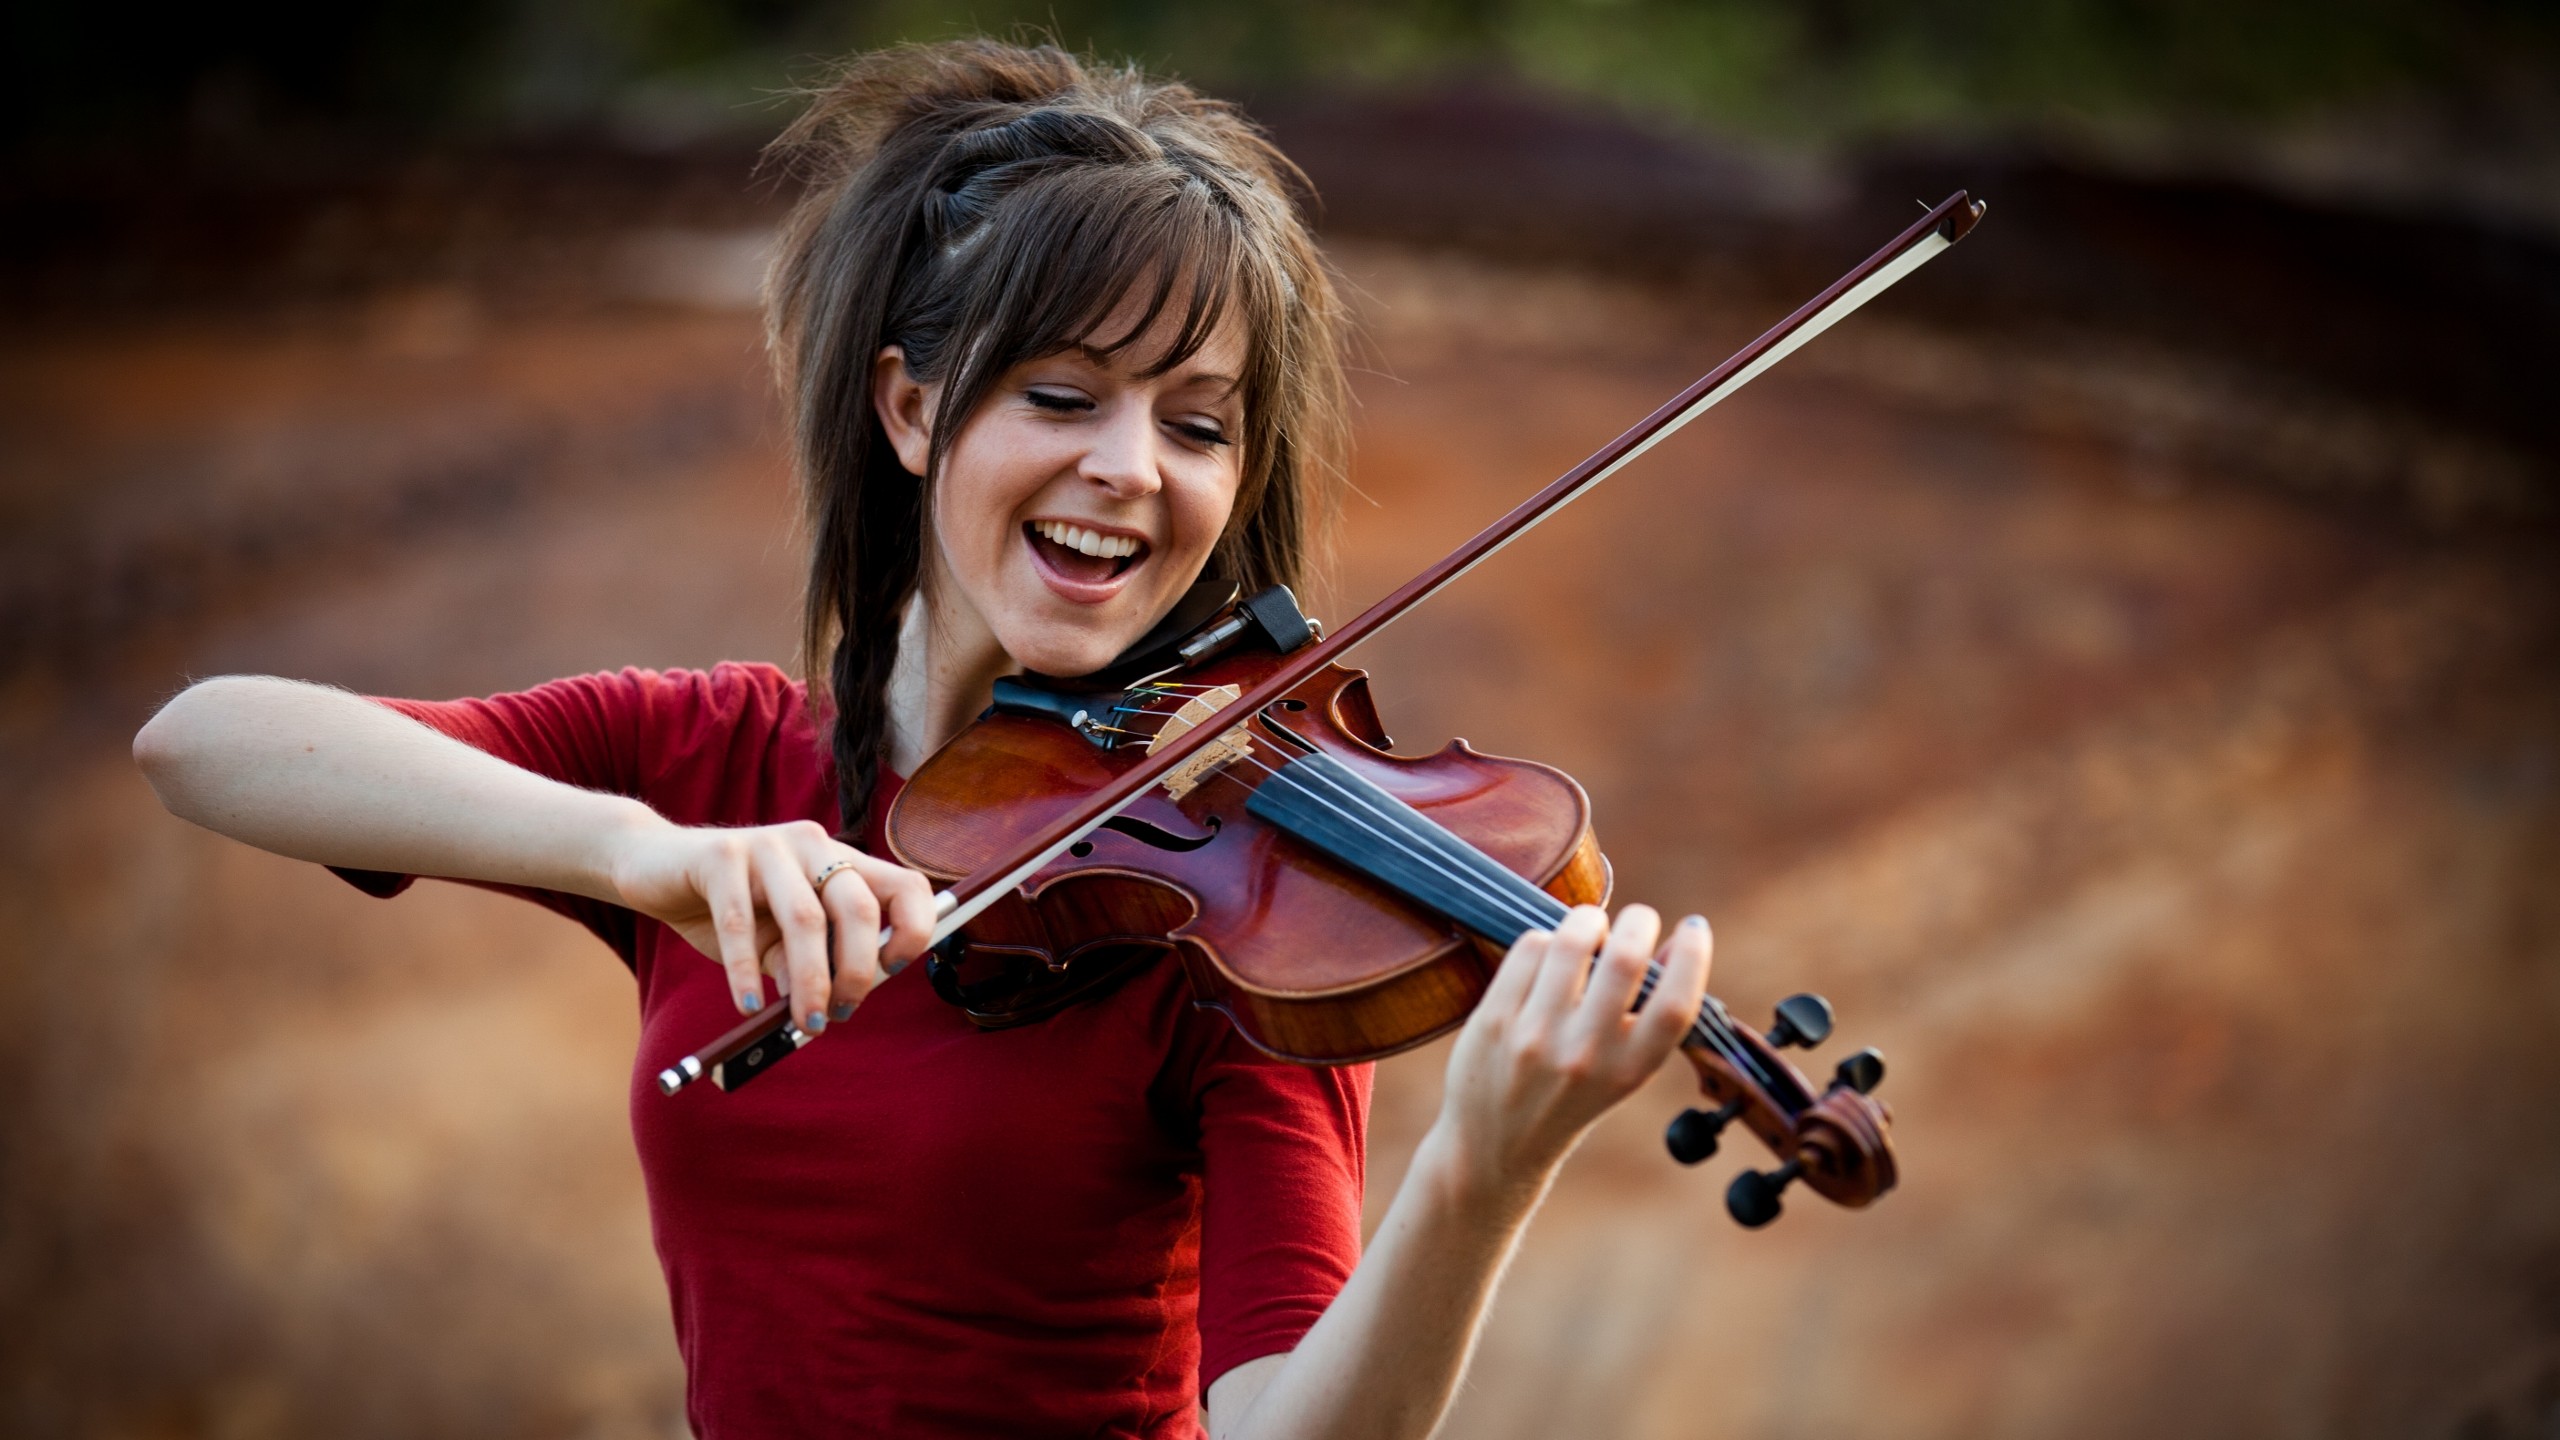 Her name is Lindsey Stirling & she is an incredible violinist famous for her choreographed violin performances! You heard me right!